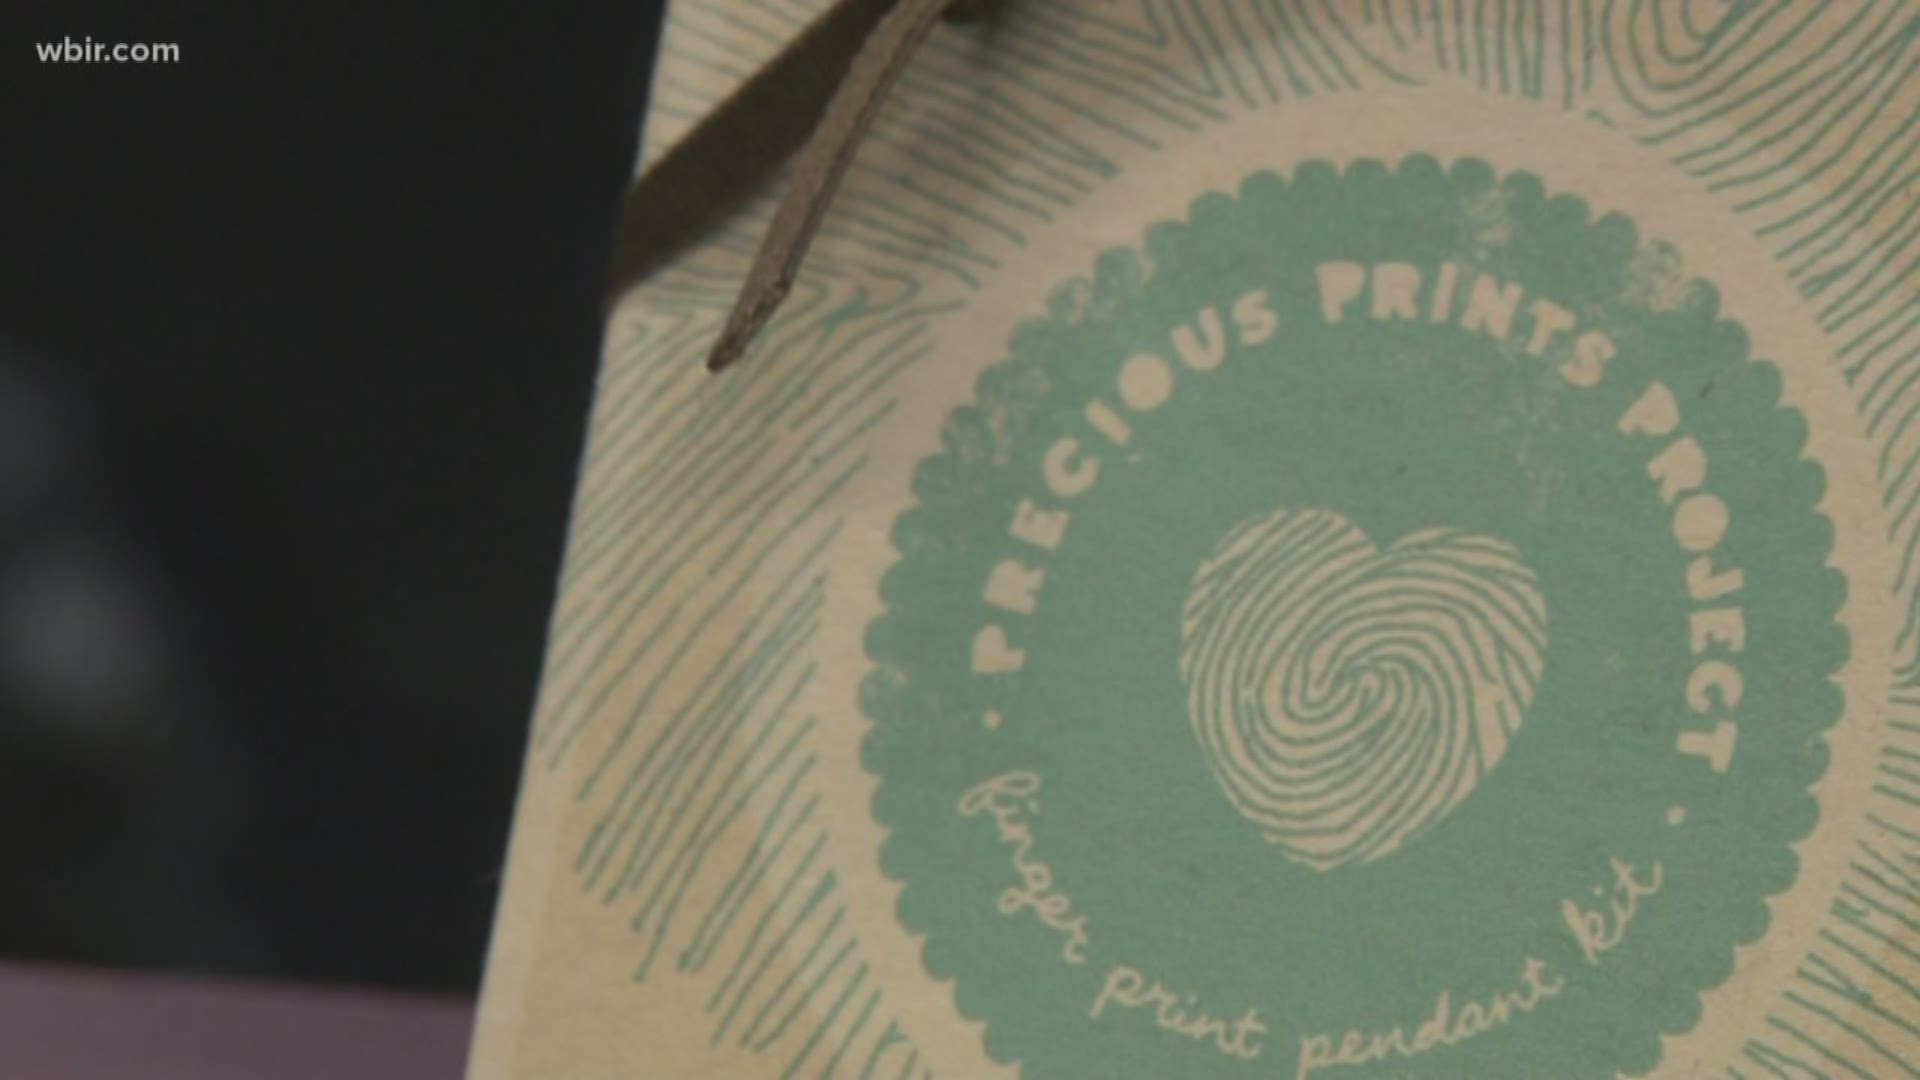 Precious Prints was started by nurses at East Tennessee Children's Hospital to offer comfort to grieving mothers. It's expanding to Nashville and Las Vegas.